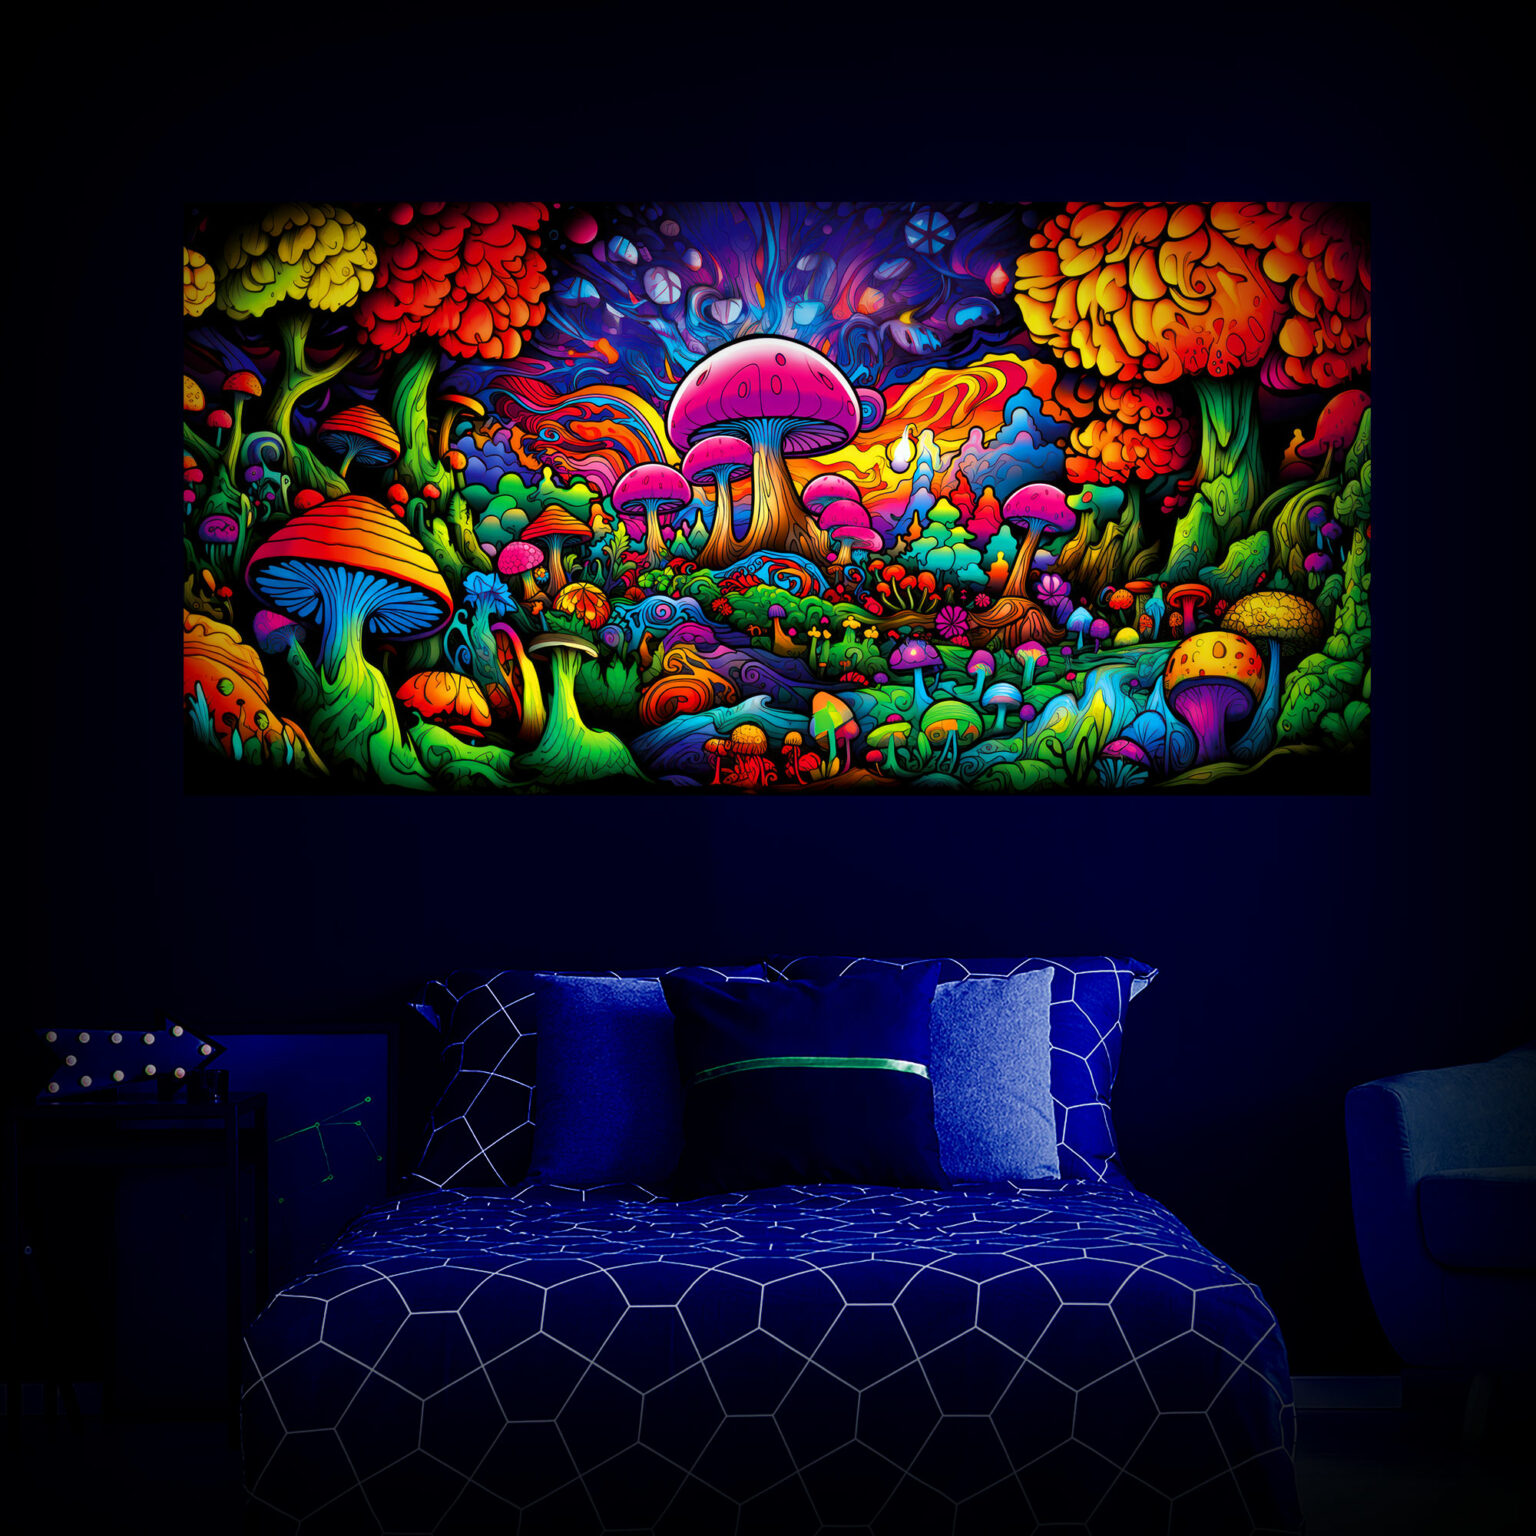 Magic Mushroom Wall Hanging, Psychedelic Backdrop Trippy Art, Blacklight Fluorescent UV Colorful, Party Decor, Bedroom Decor Stoner Gifts 11 - Bedroom Preview